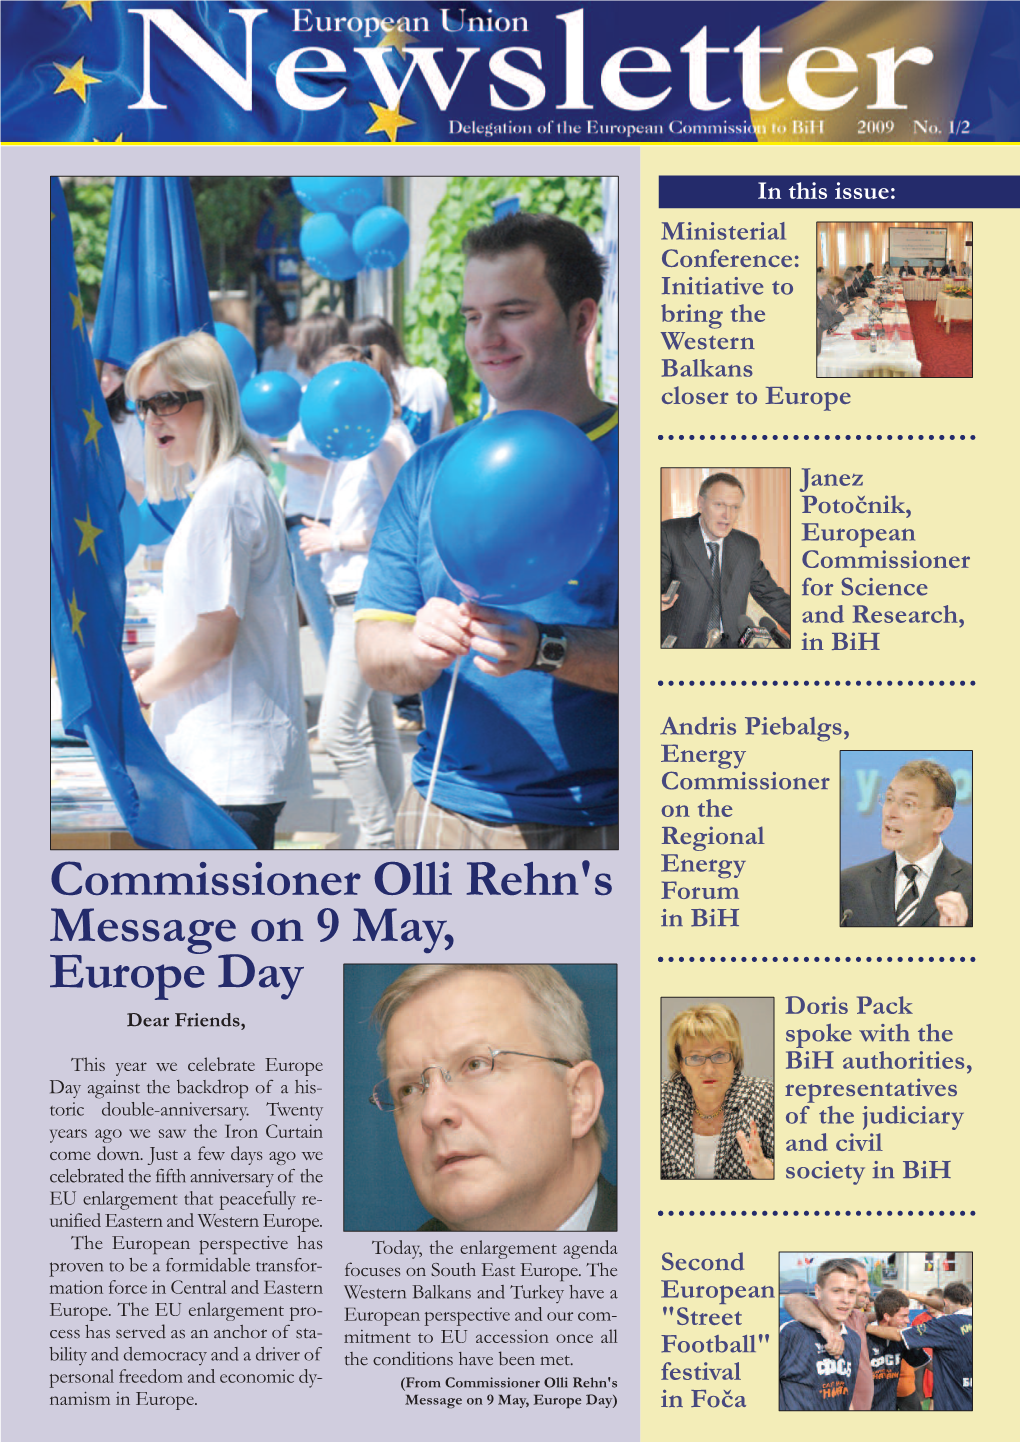 Commissioner Olli Rehn's Message on 9 May, Europe